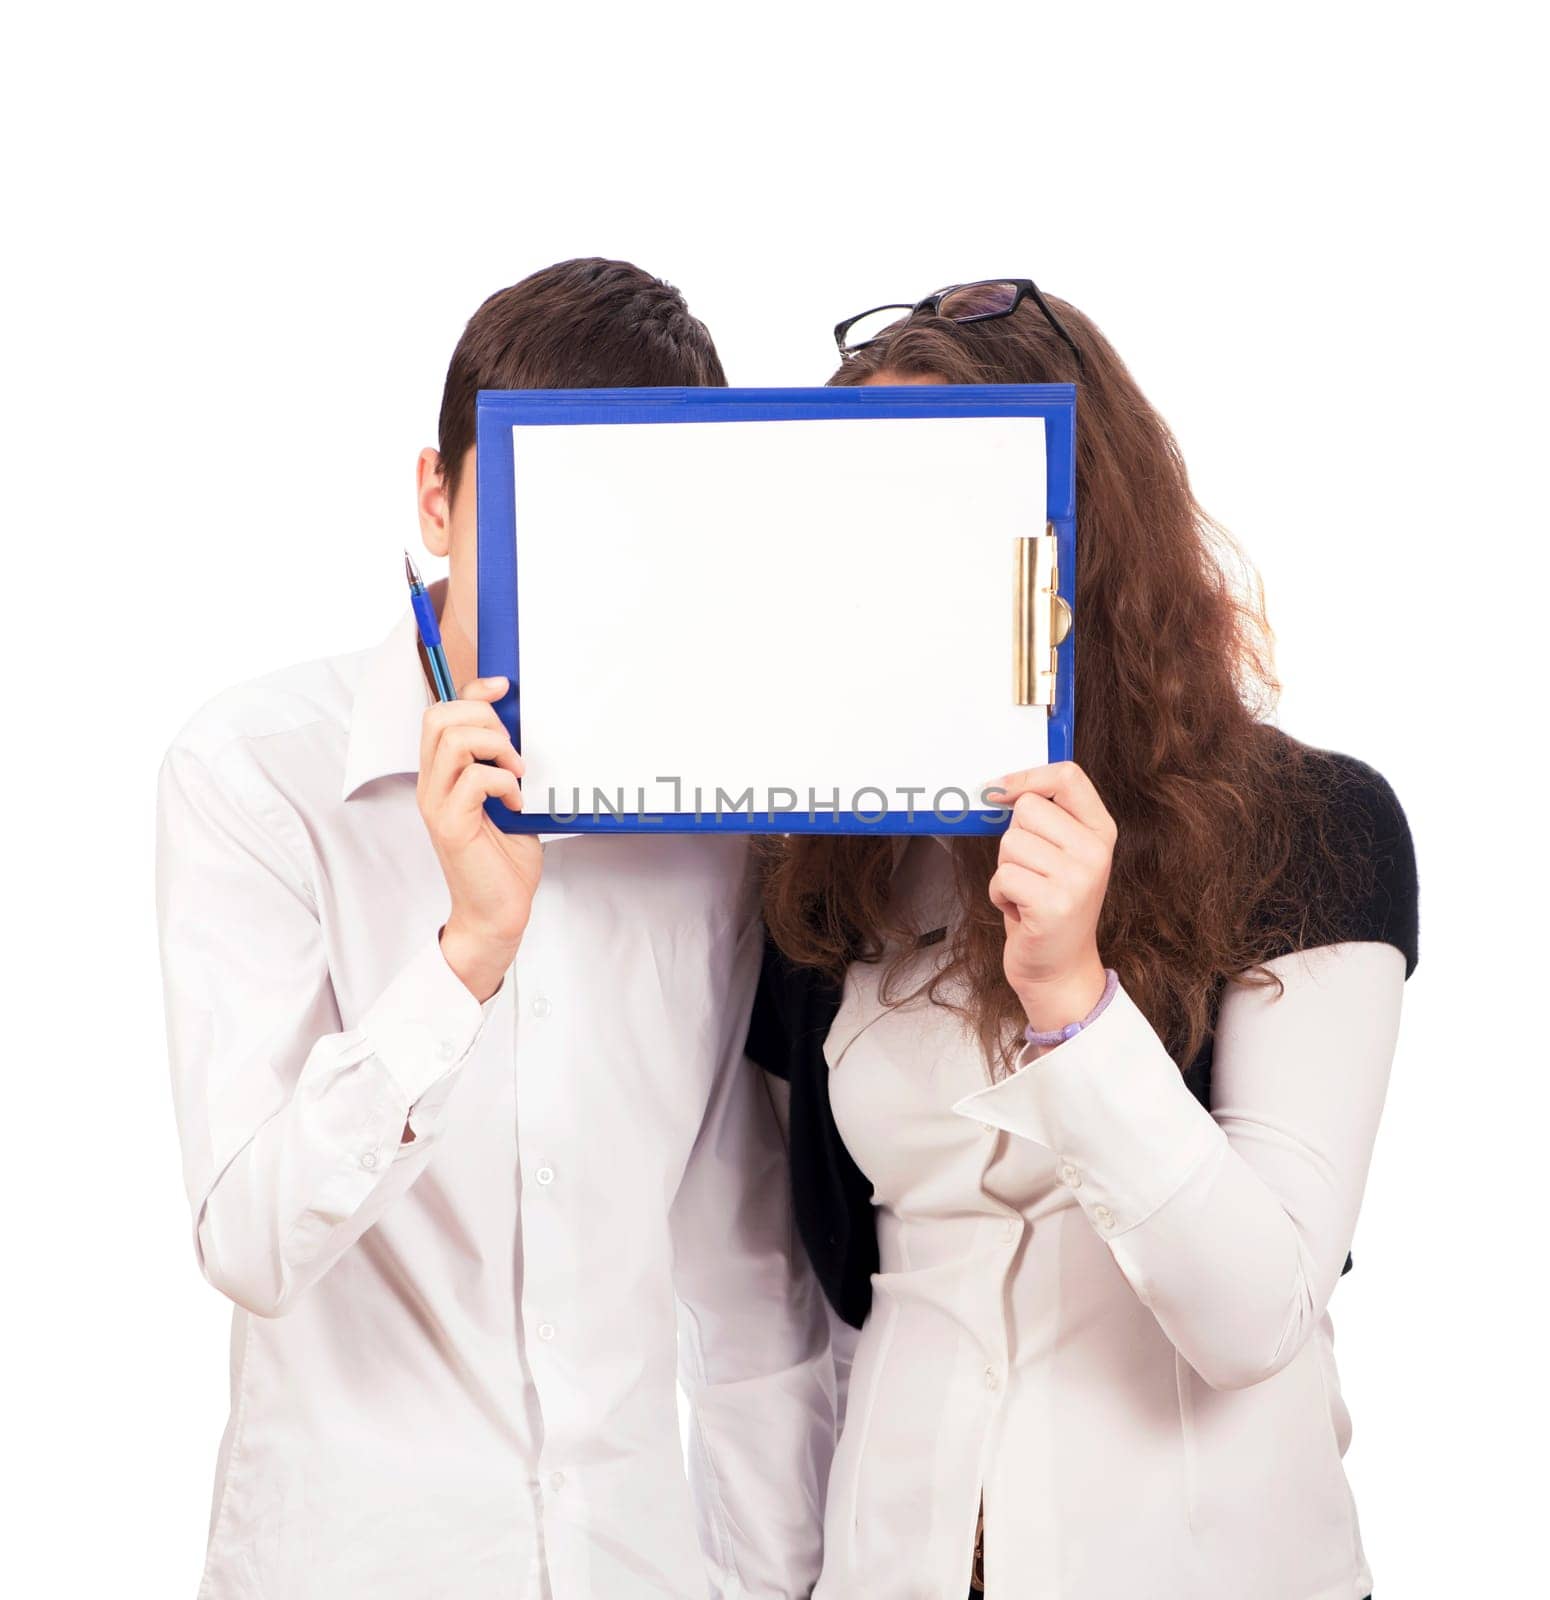 schoolchildren and blank tablet. schoolchildren, a girl and a boy are holding a tablet with a blank page, space for text